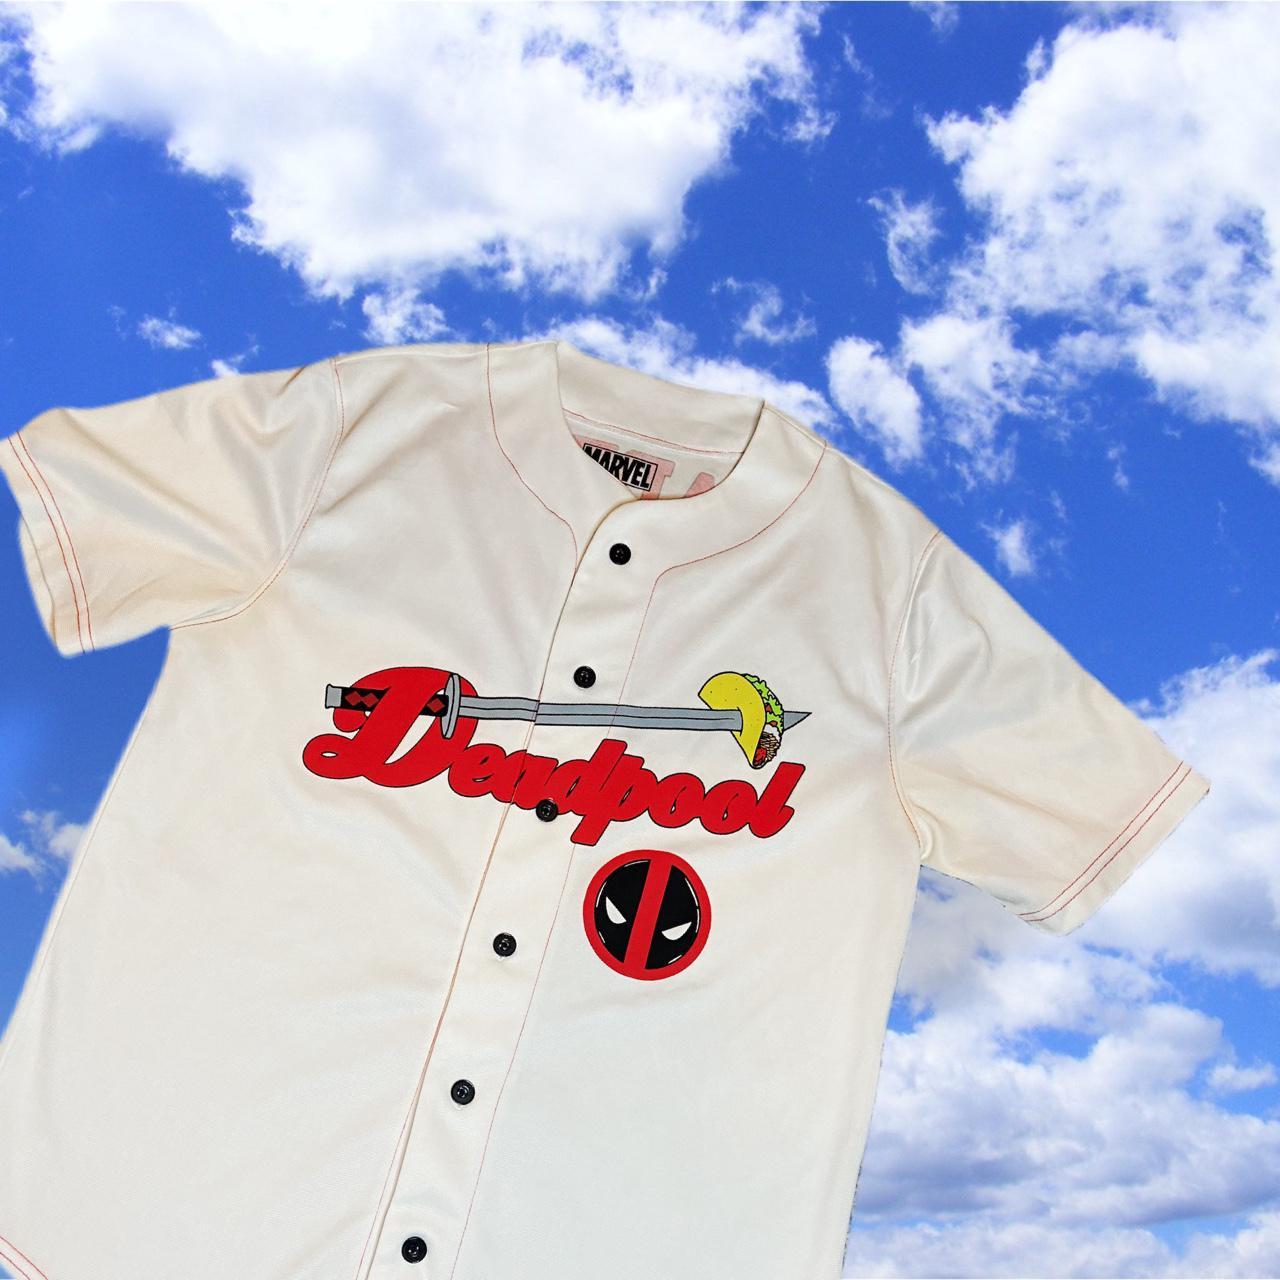 Product Image 1 - Deadpool Jersey ☠️ 🌮 
Size